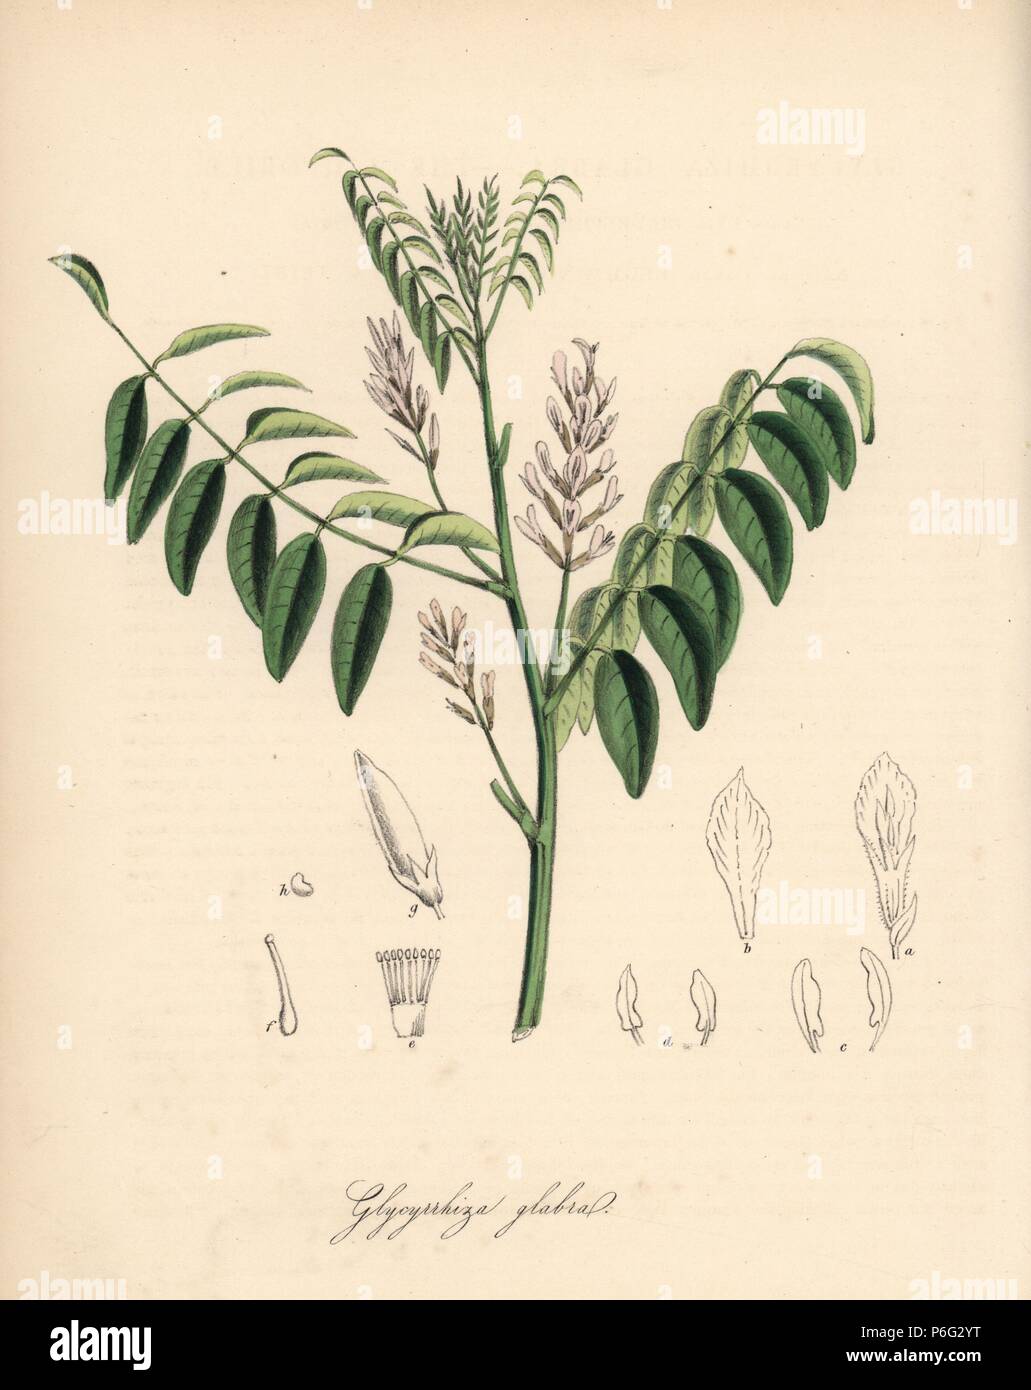 Liquorice or licorice plant, Glycyrrhiza glabra. After an illustration by G. Reid in Churchill and Stephenson's 'Medical Botany.' Handcoloured zincograph by C. Chabot drawn by Miss M. A. Burnett from her 'Plantae Utiliores: or Illustrations of Useful Plants,' Whittaker, London, 1842. Miss Burnett drew the botanical illustrations, but the text was chiefly by her late brother, British botanist Gilbert Thomas Burnett (1800-1835). Stock Photo